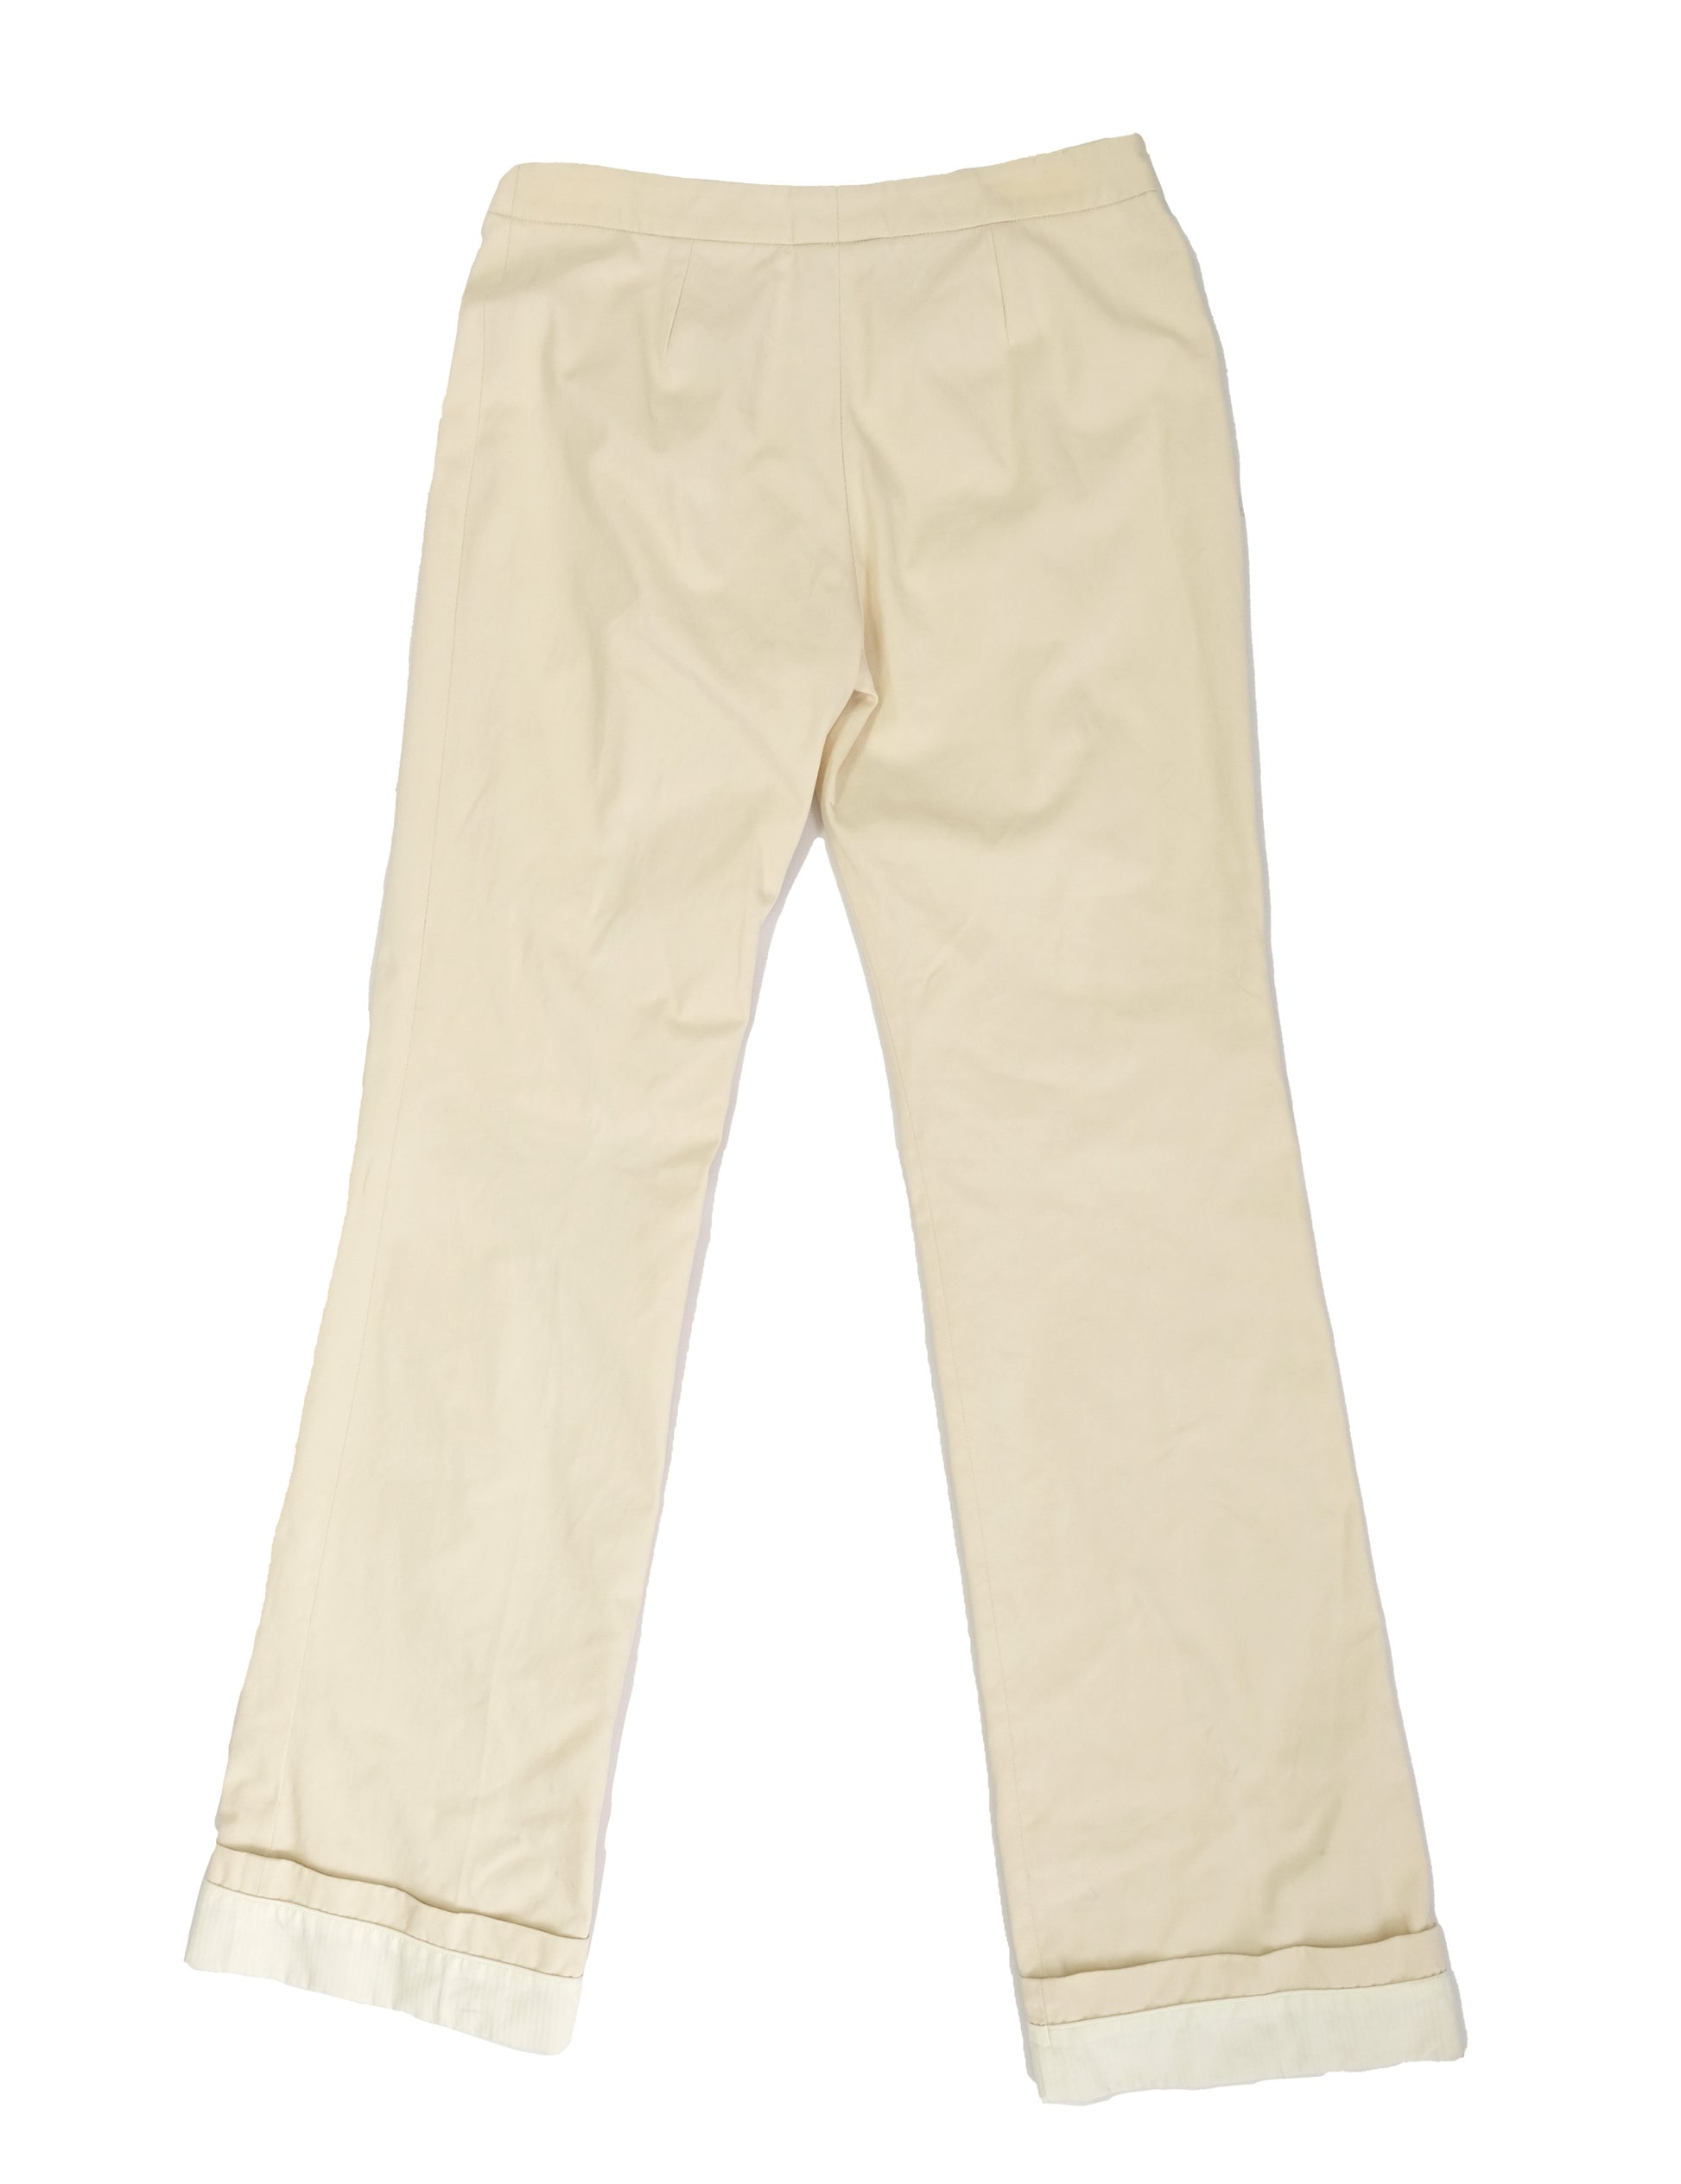 Alexander McQueen Flared Trousers in Ivory Cotton, IT44 UK10-12